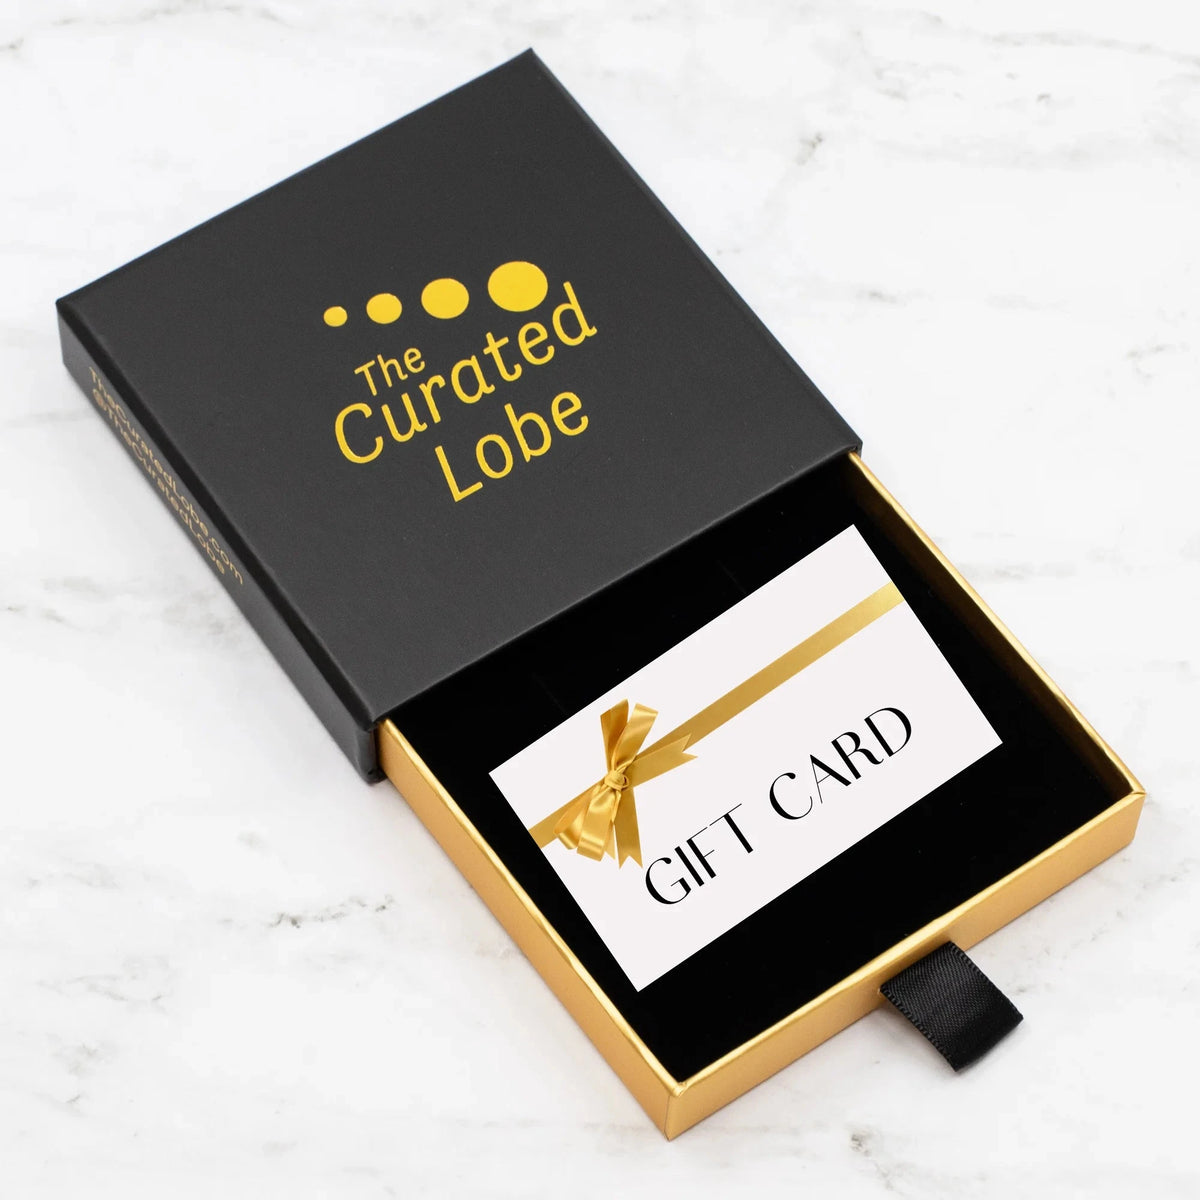 $25 Gift Cards The Curated Lobe Gift Card The Curated Lobe